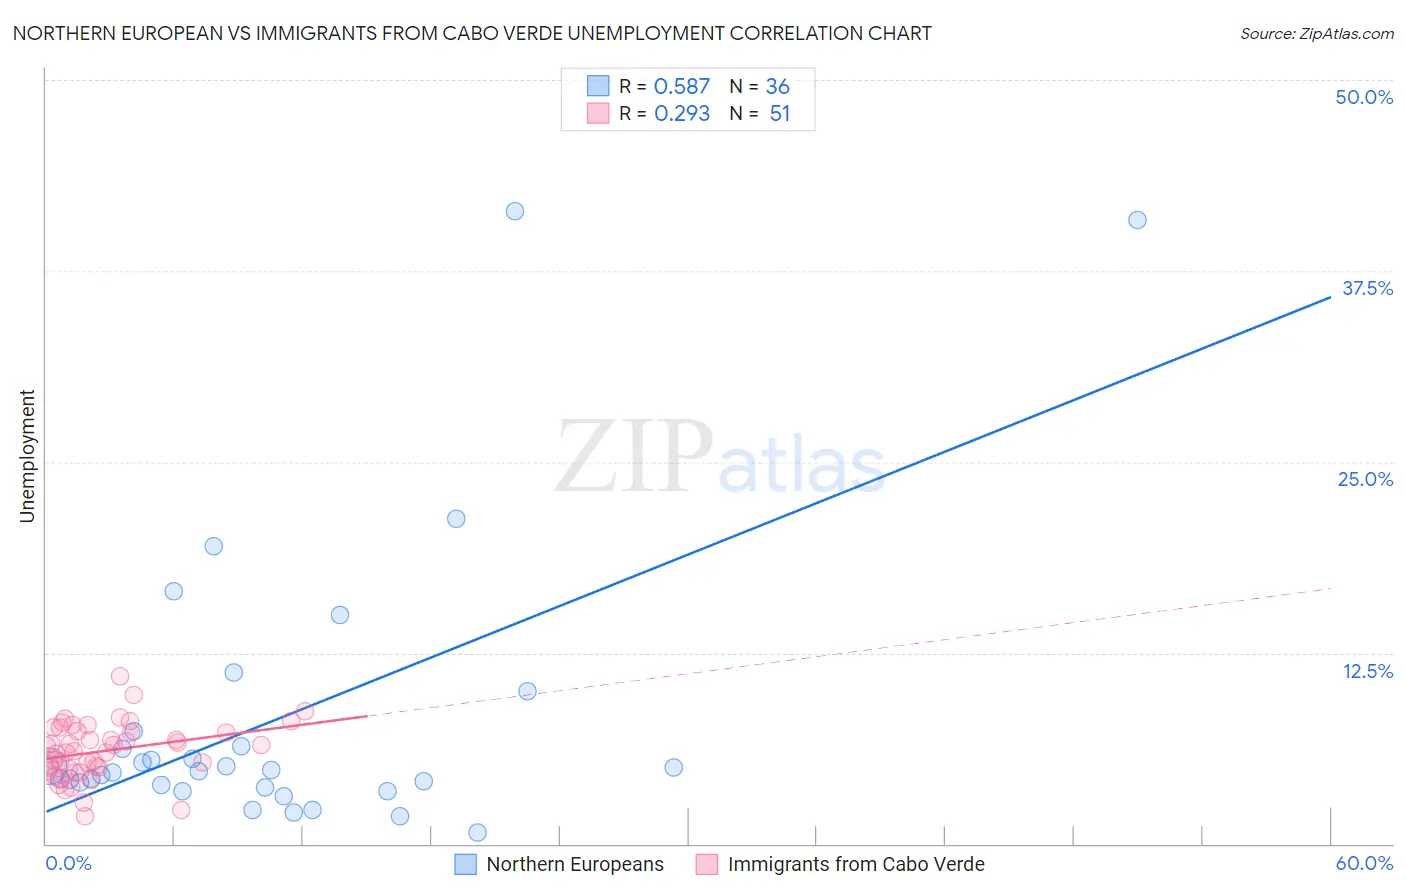 Northern European vs Immigrants from Cabo Verde Unemployment